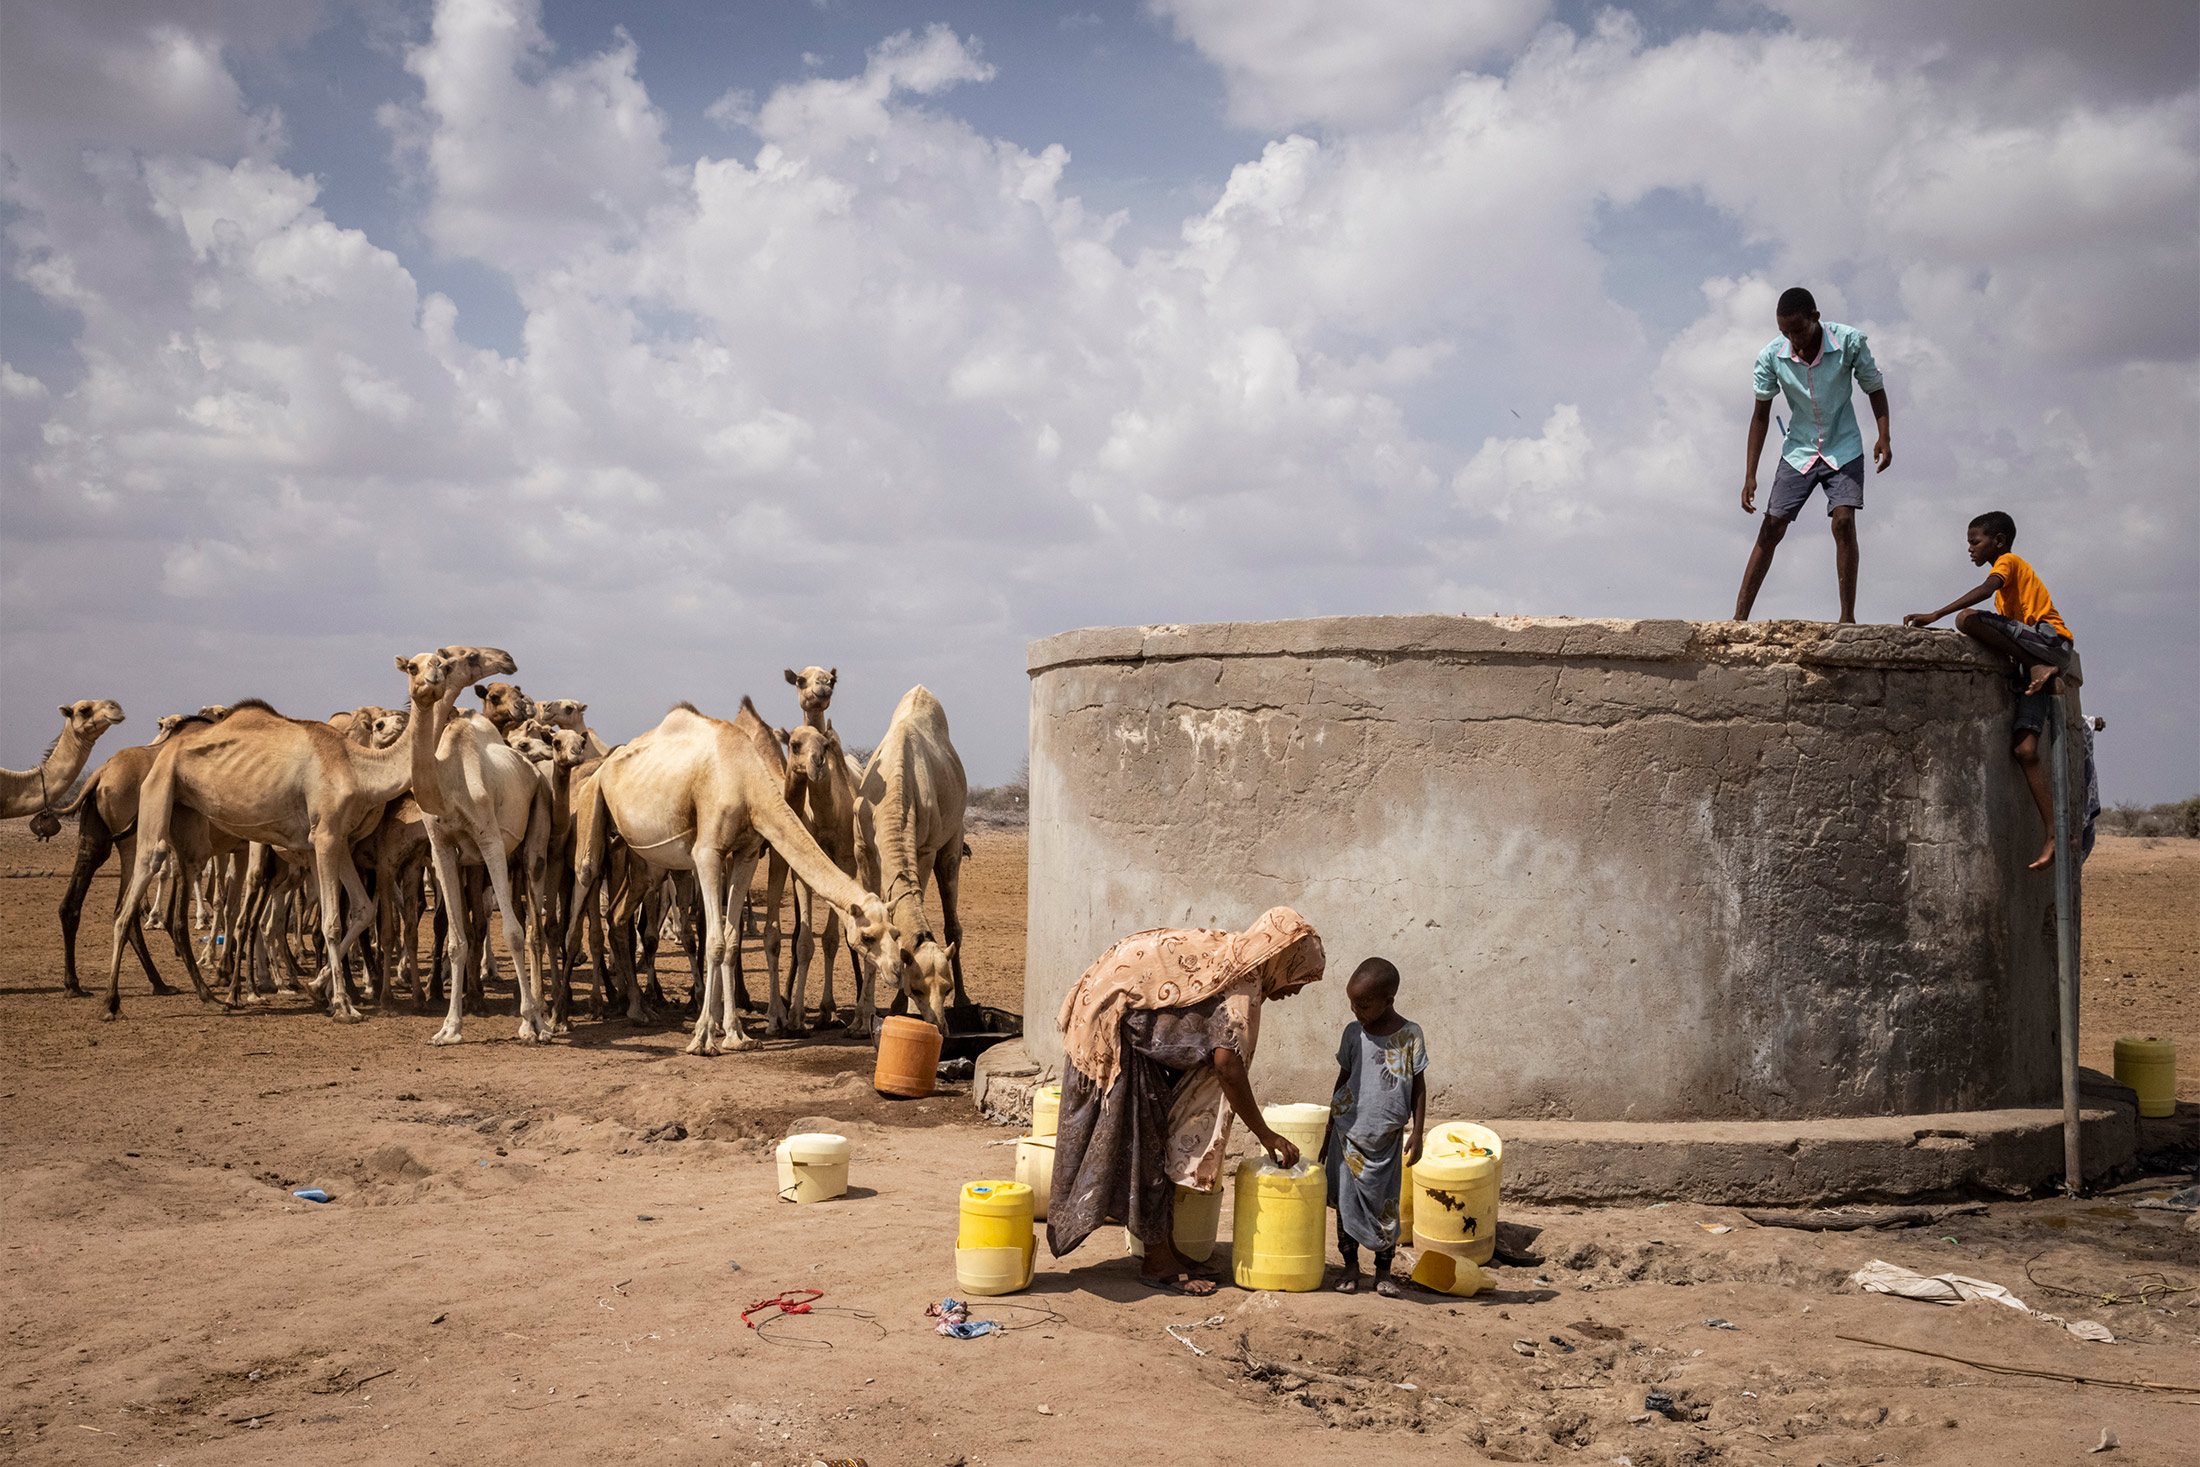 Drought in East Africa Means 10 Million People Need Urgent Aid Bloomberg